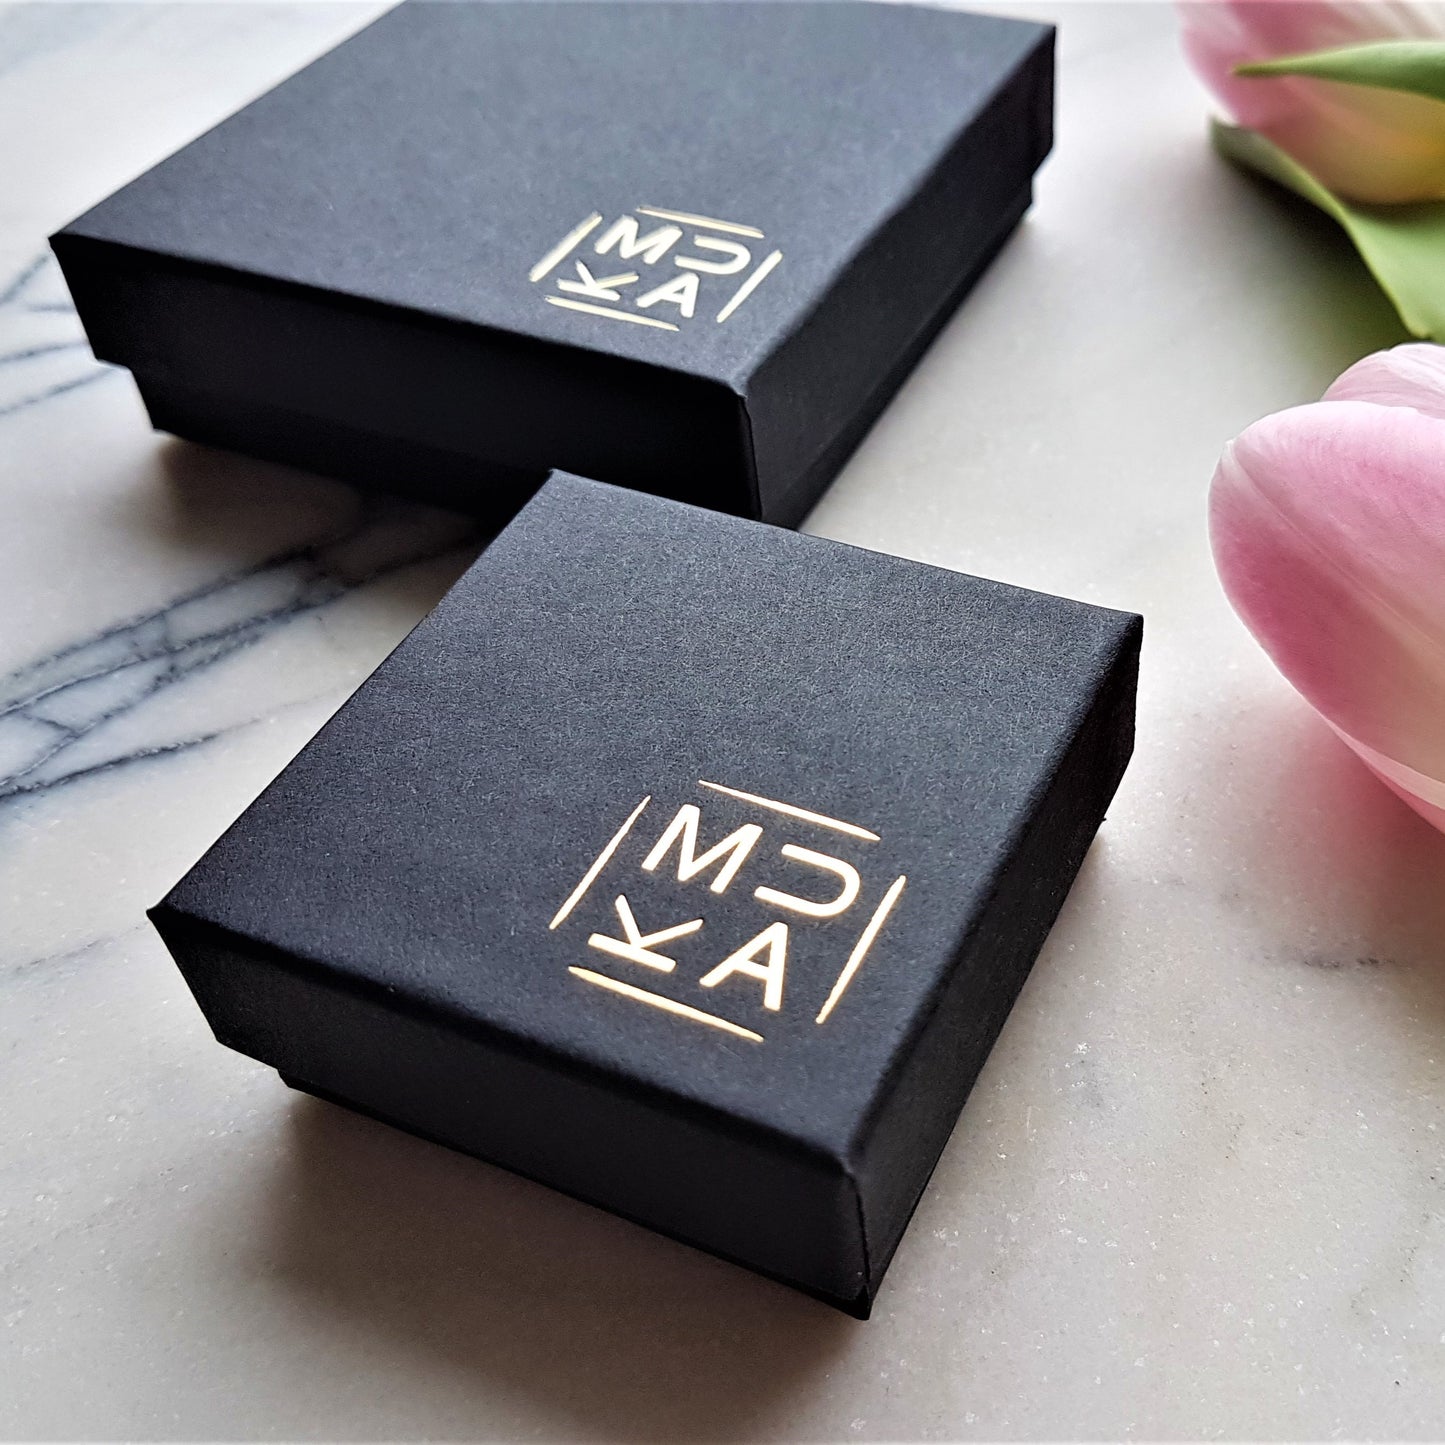 MUKA studio branded jewellery boxes in black recycled cardboard with gold foil logo